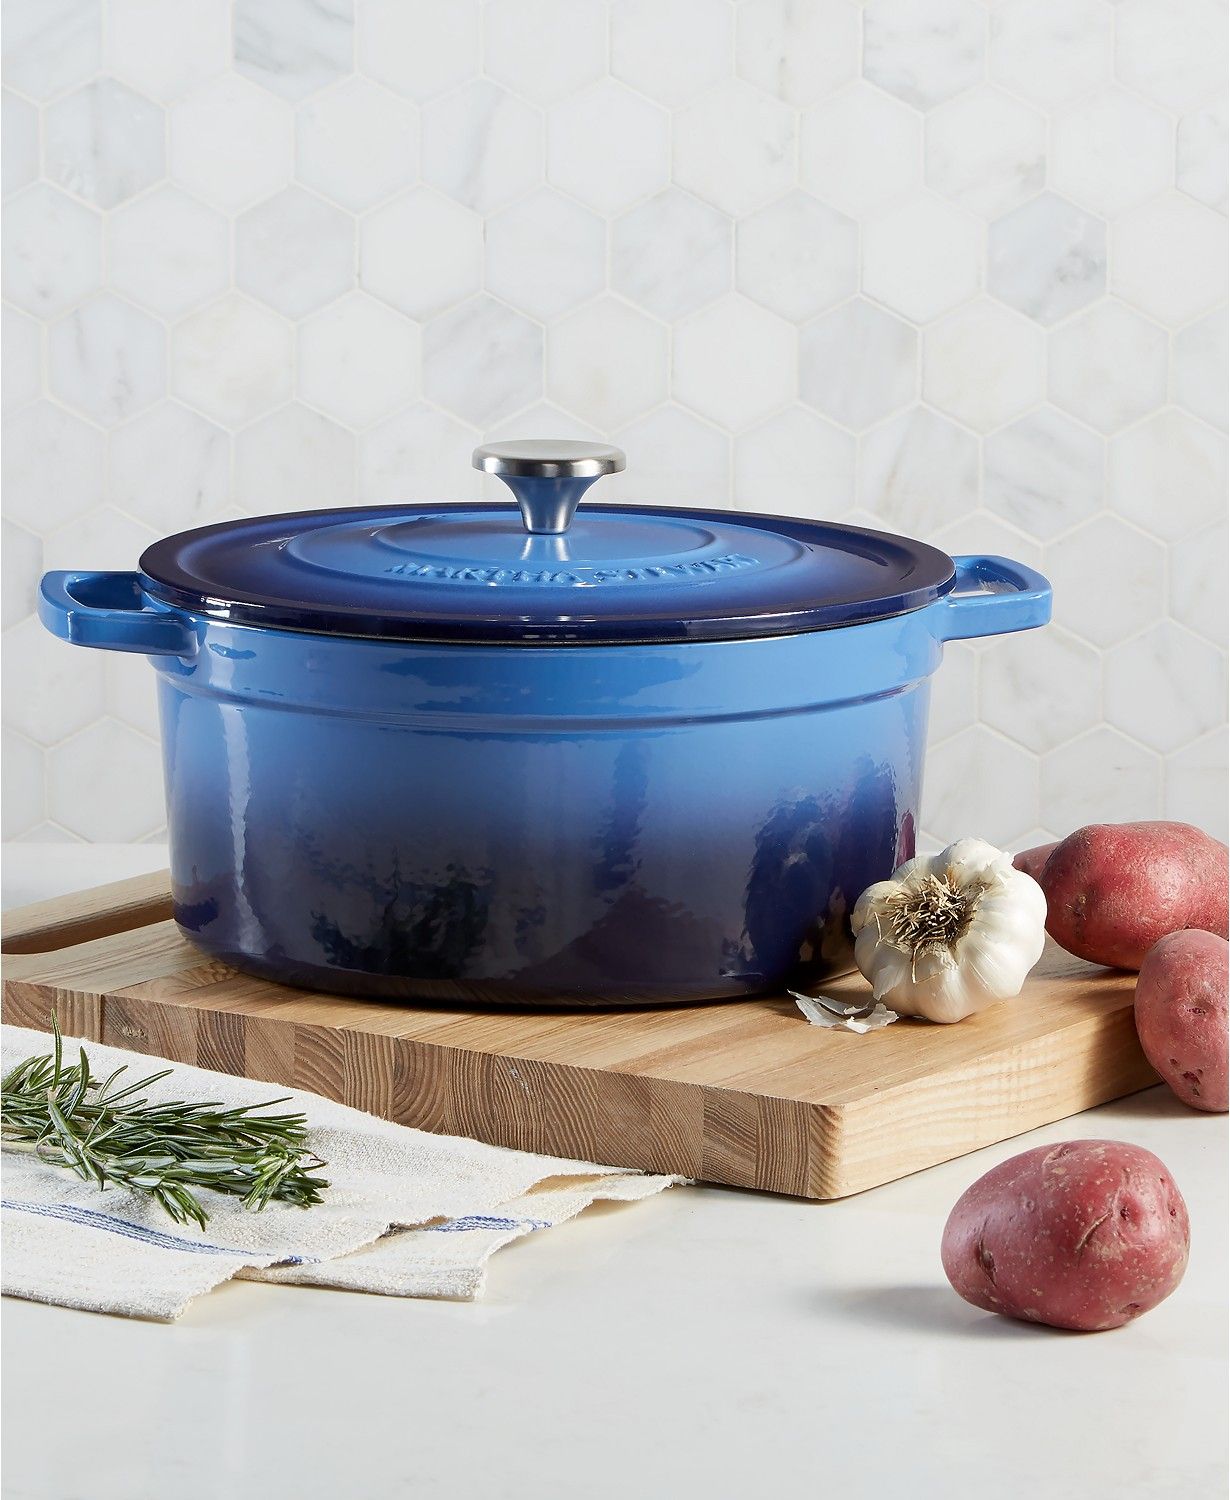 Martha Stewart Collection Green Enameled Cast Iron Round 6-Qt. Dutch Oven,  Created for Macy's - Macy's